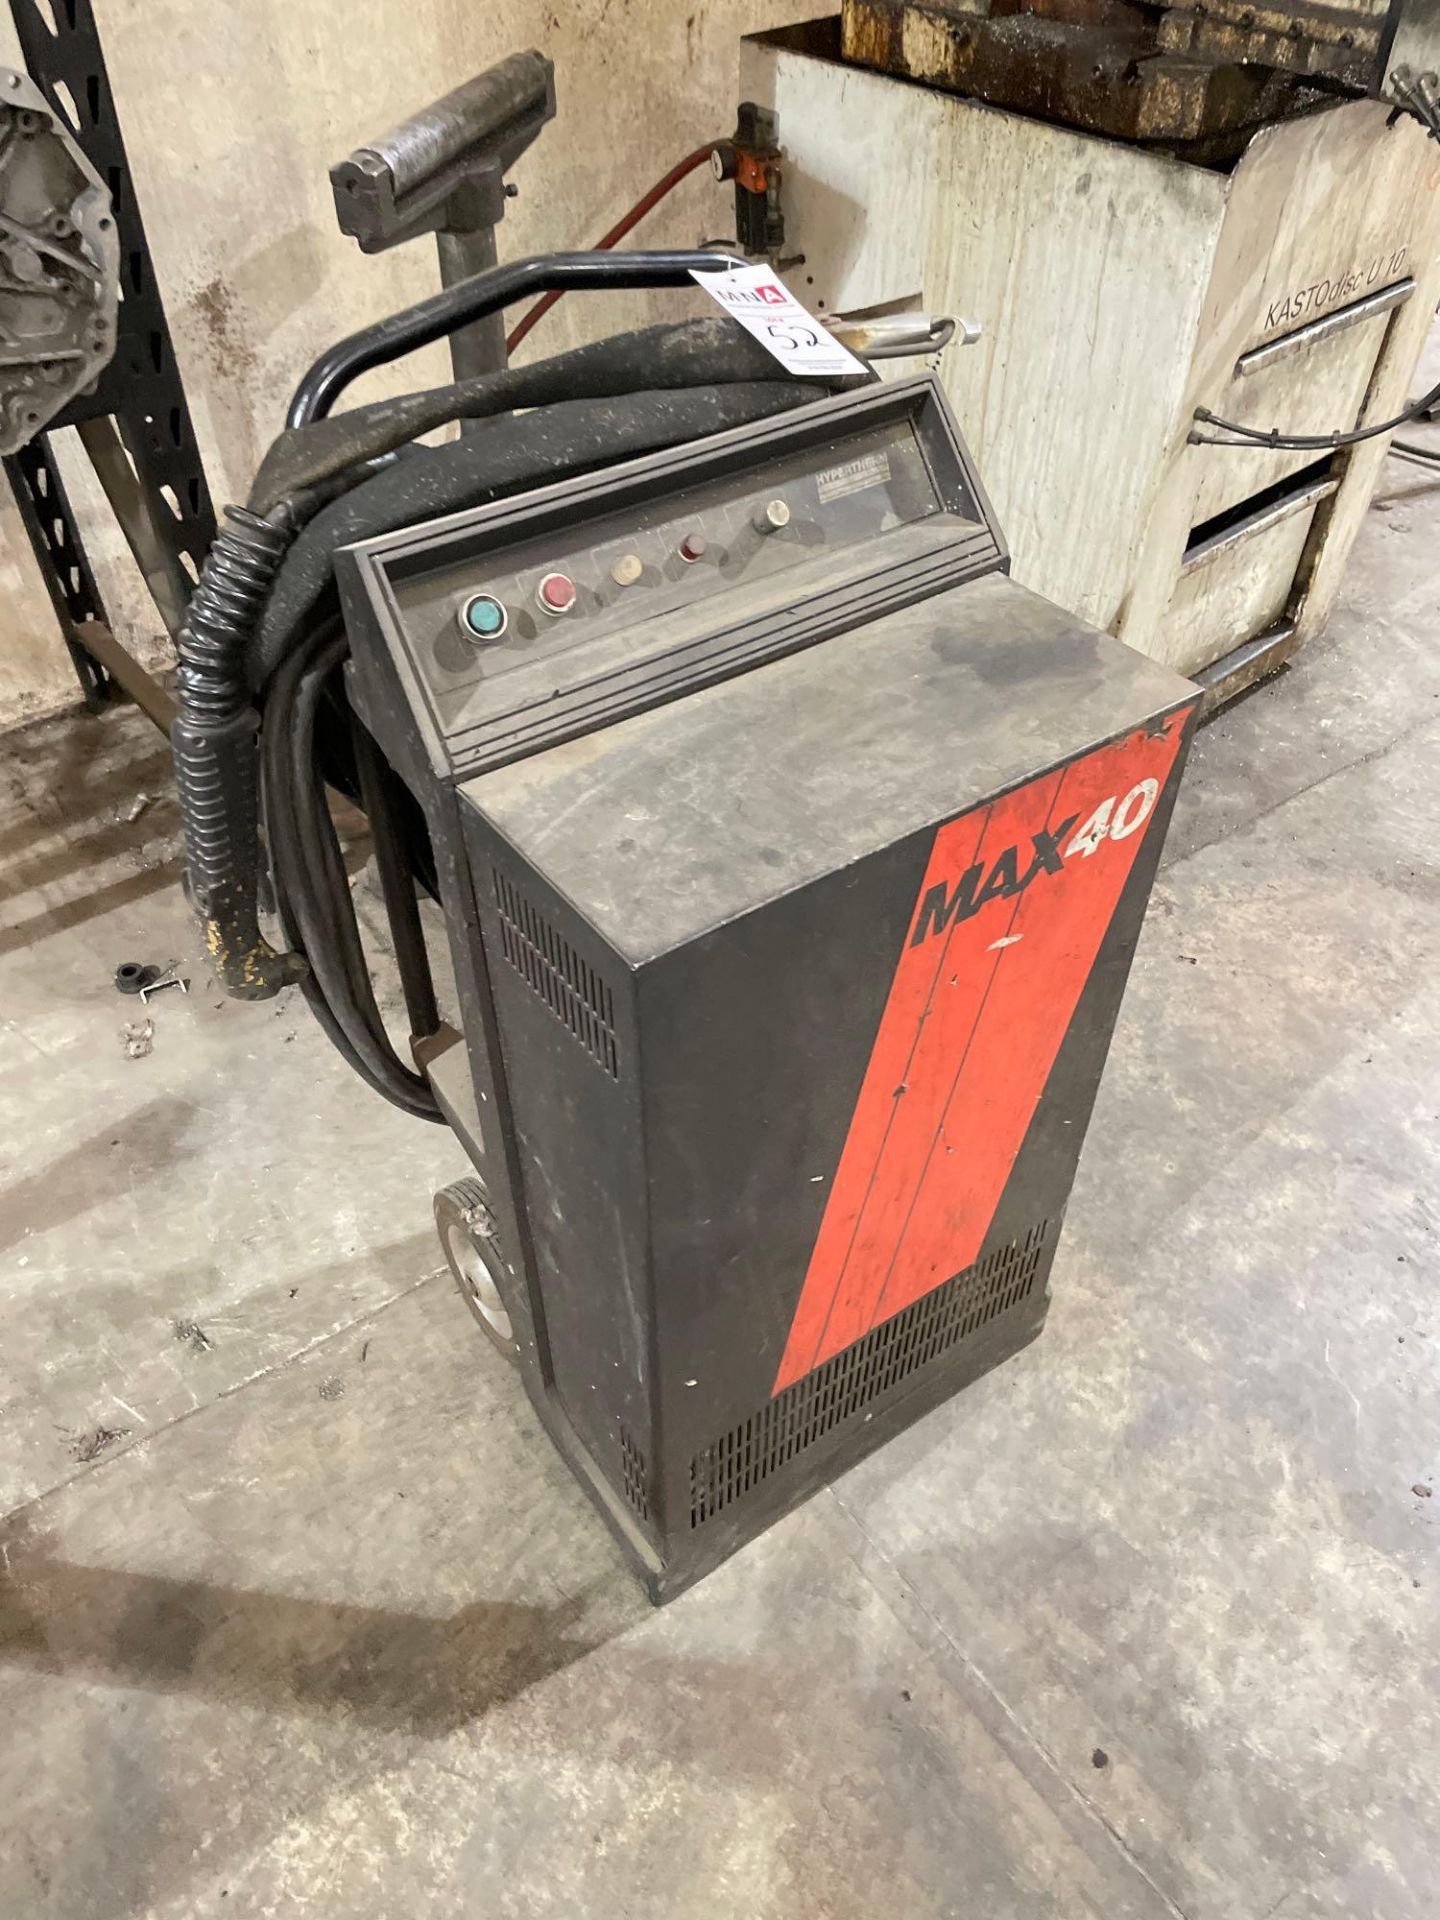 Hypertherm Max 40 Plasma Cutter - Image 3 of 5